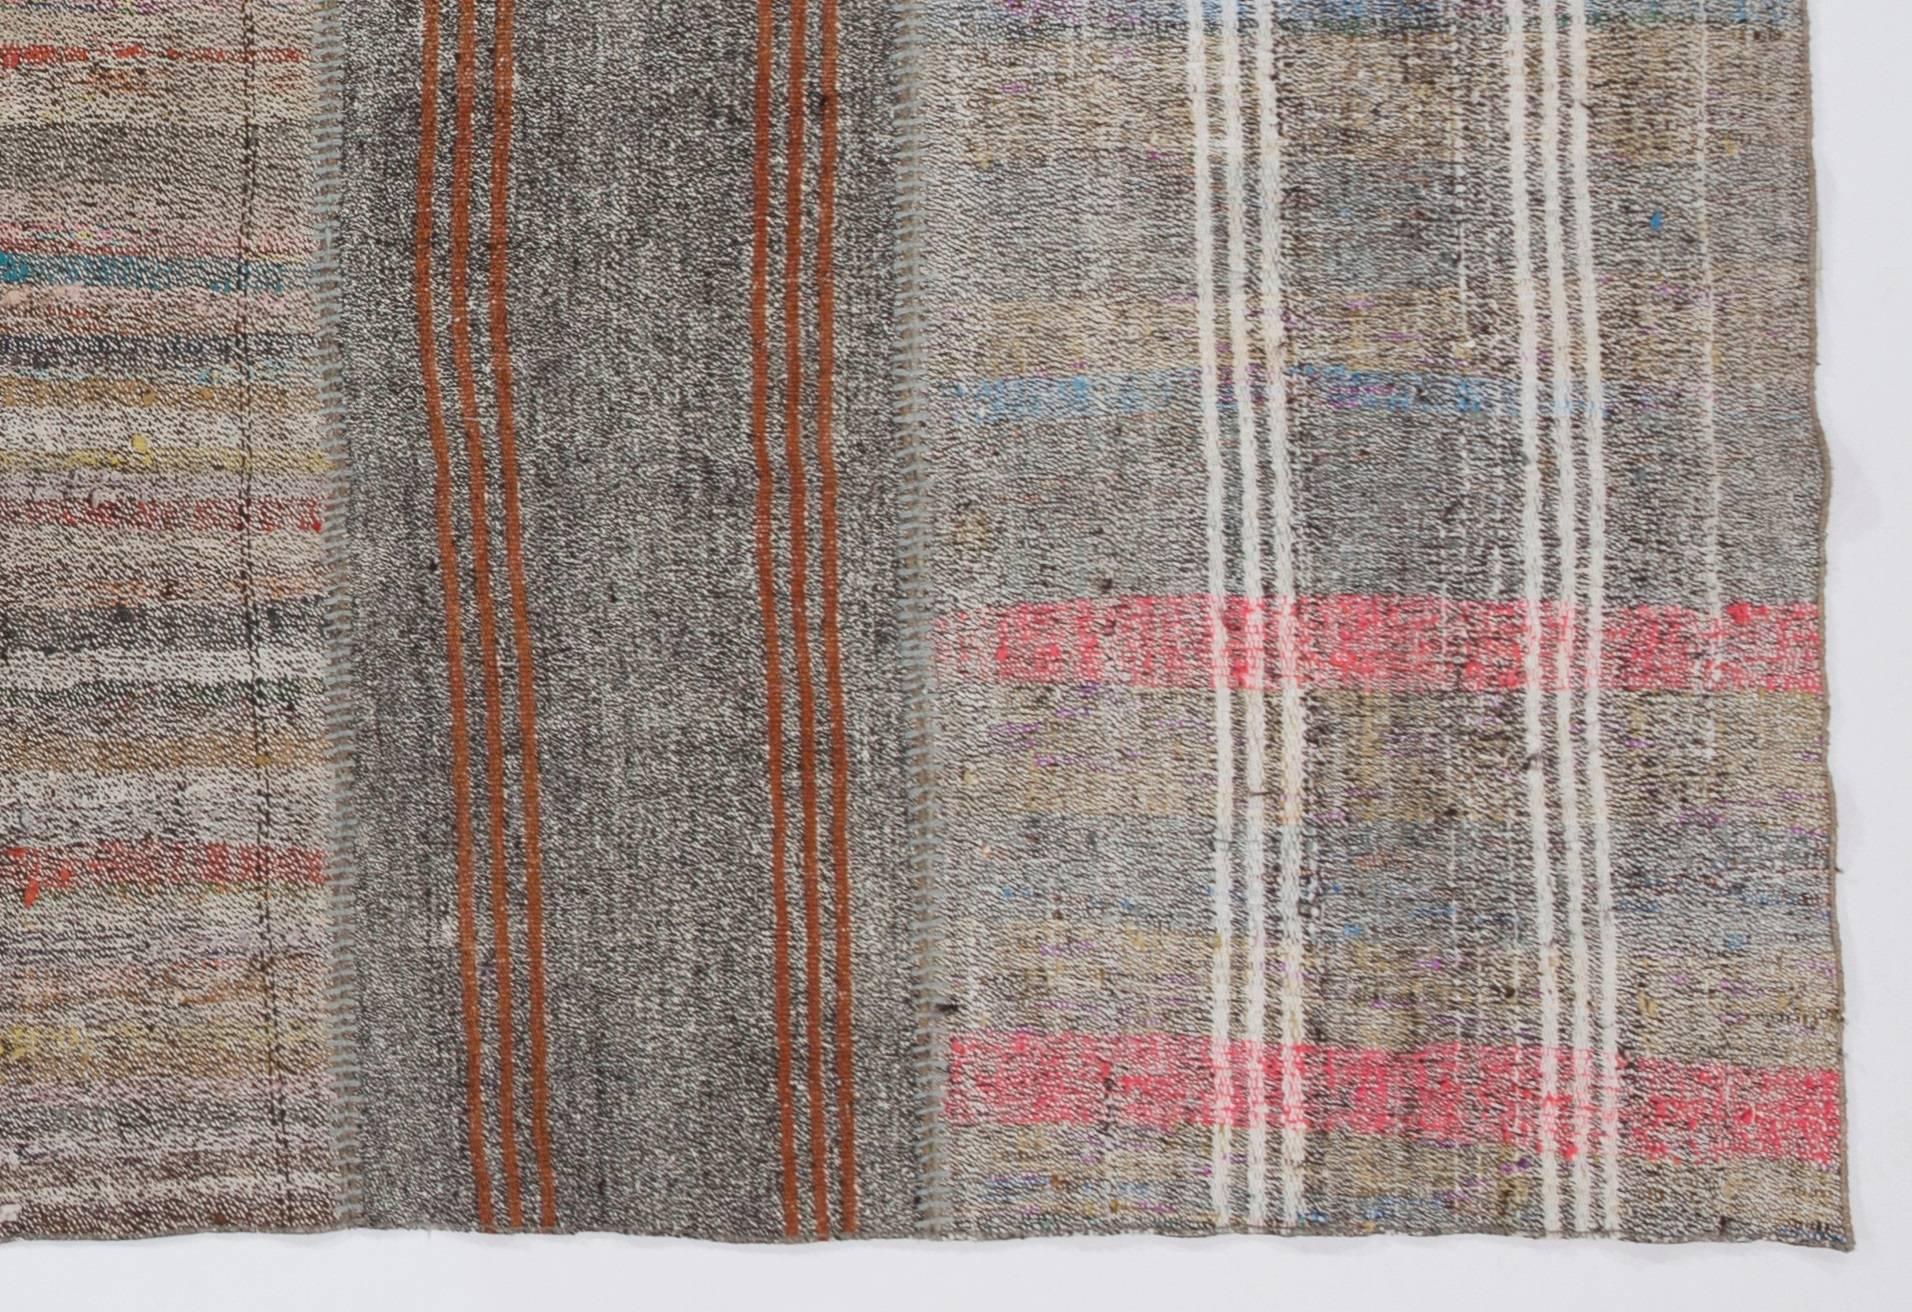 These authentic flat-weaves (Kilims) from Eastern Turkey were handwoven by Nomads circa 1970s to be used as floor coverings in their tents. They were made to use for everyday life rather than re-sale and export purposes and today they are very